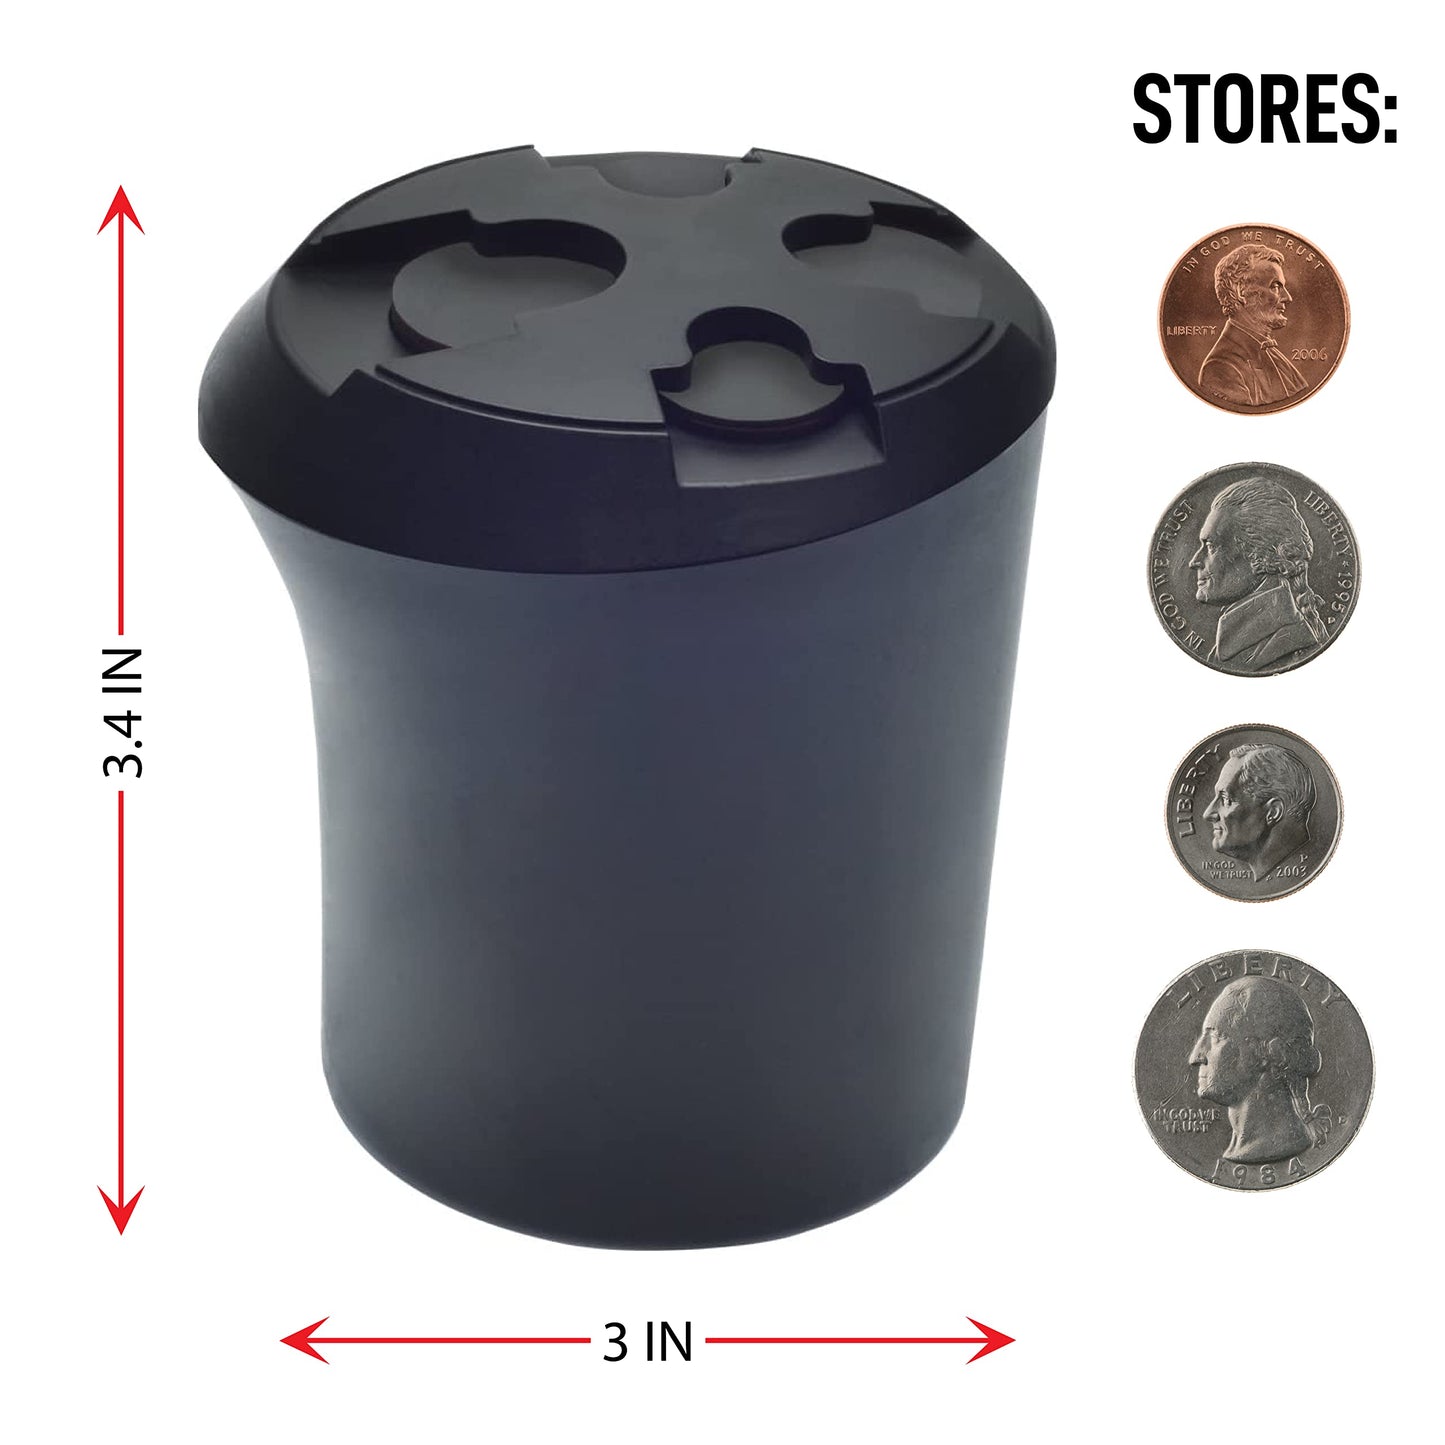 Nadex Coin Organizer Pro - Car Cup Coin Holder and Sorter